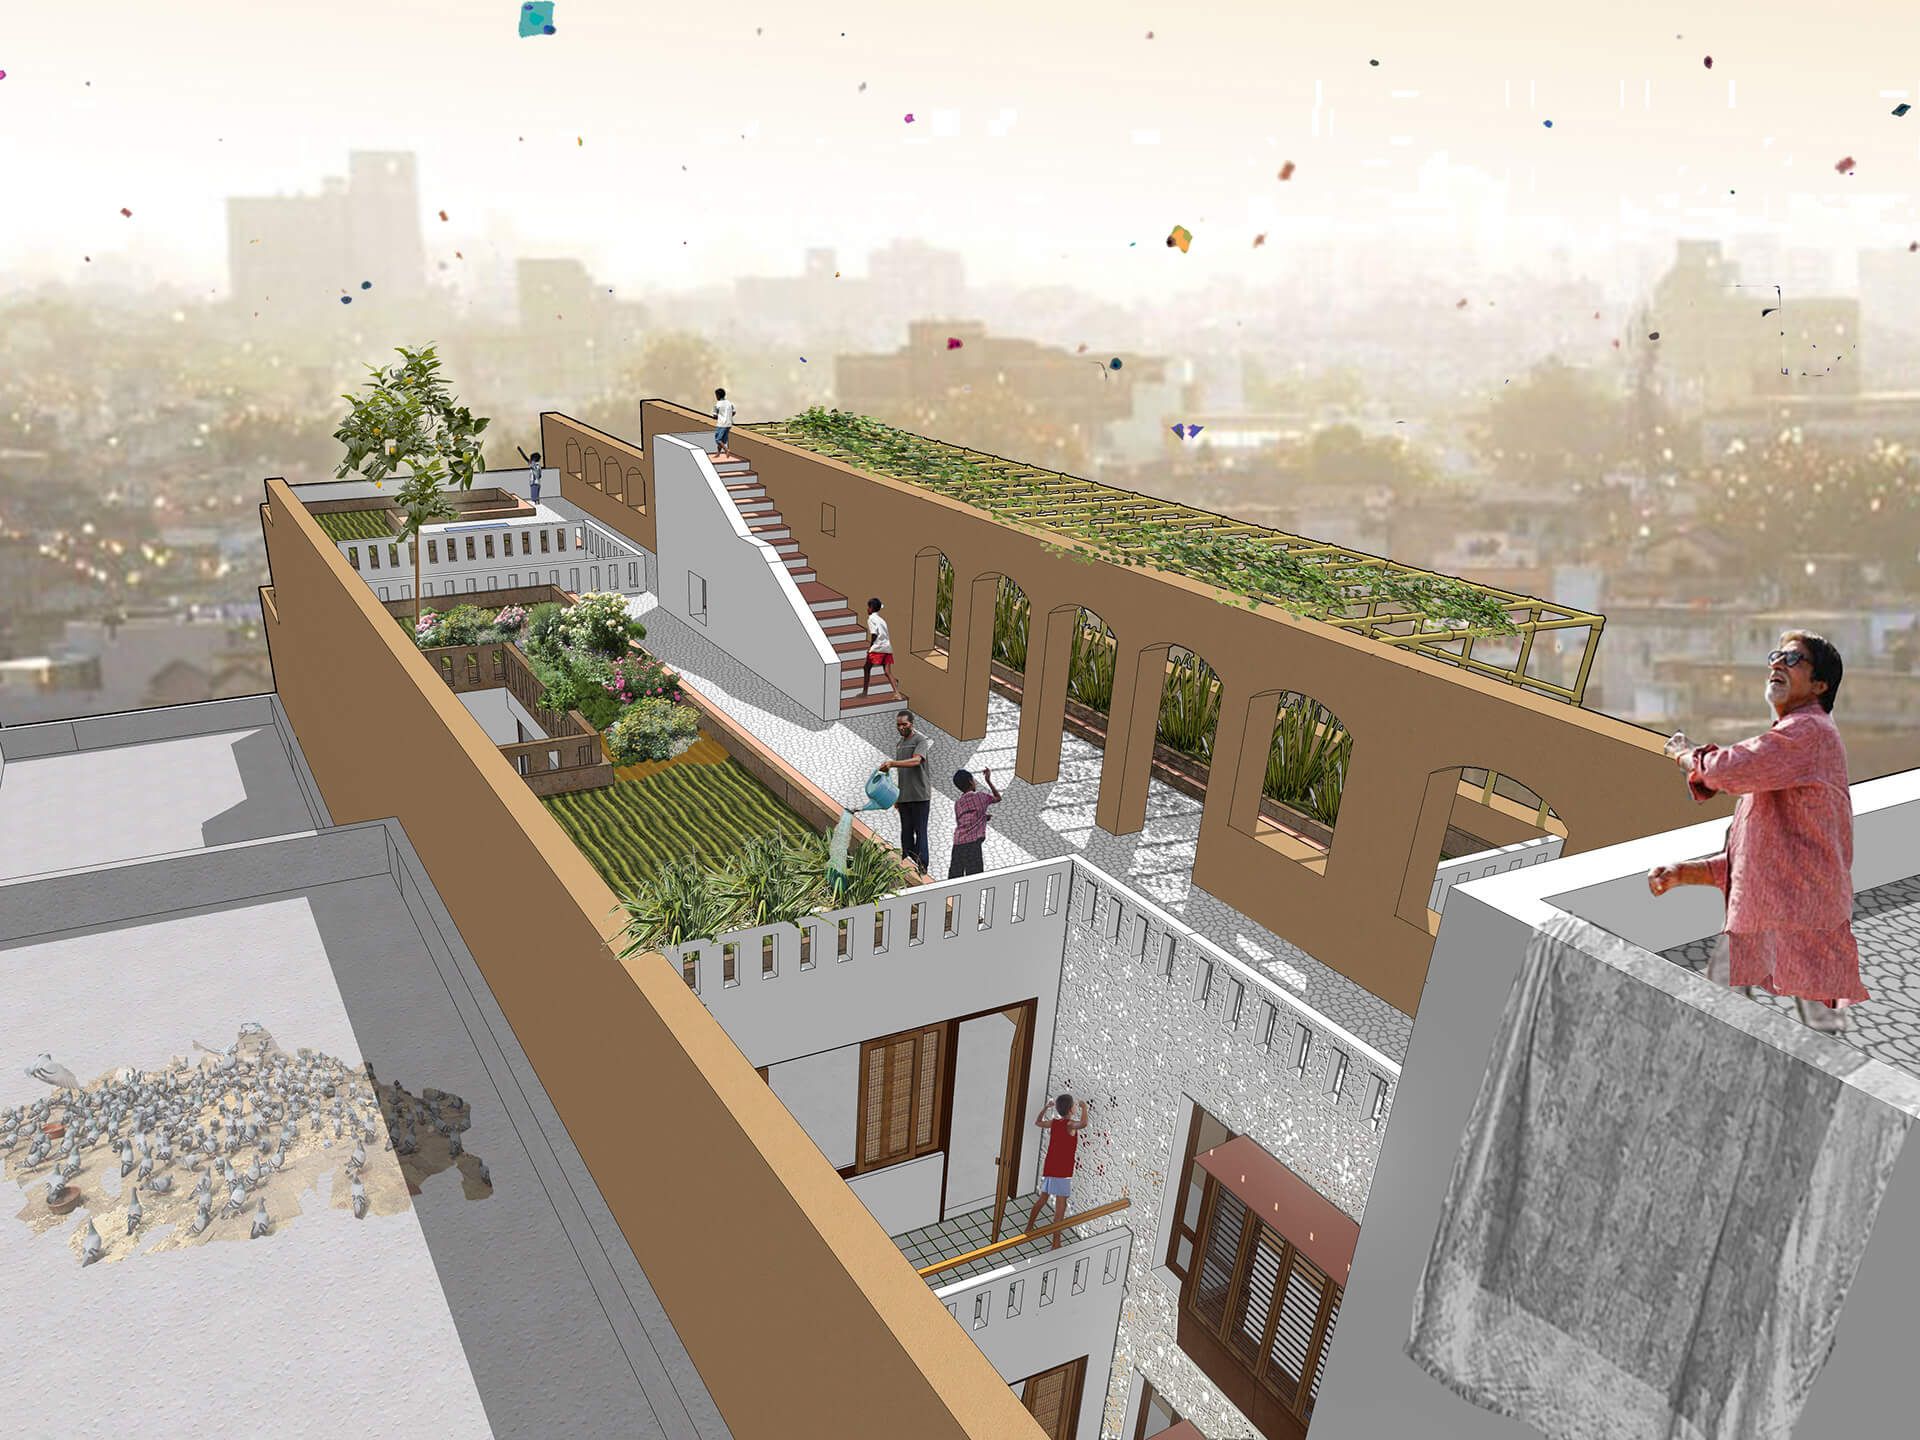 Modelled rooftop of a building with a terrace farm and people flying kites